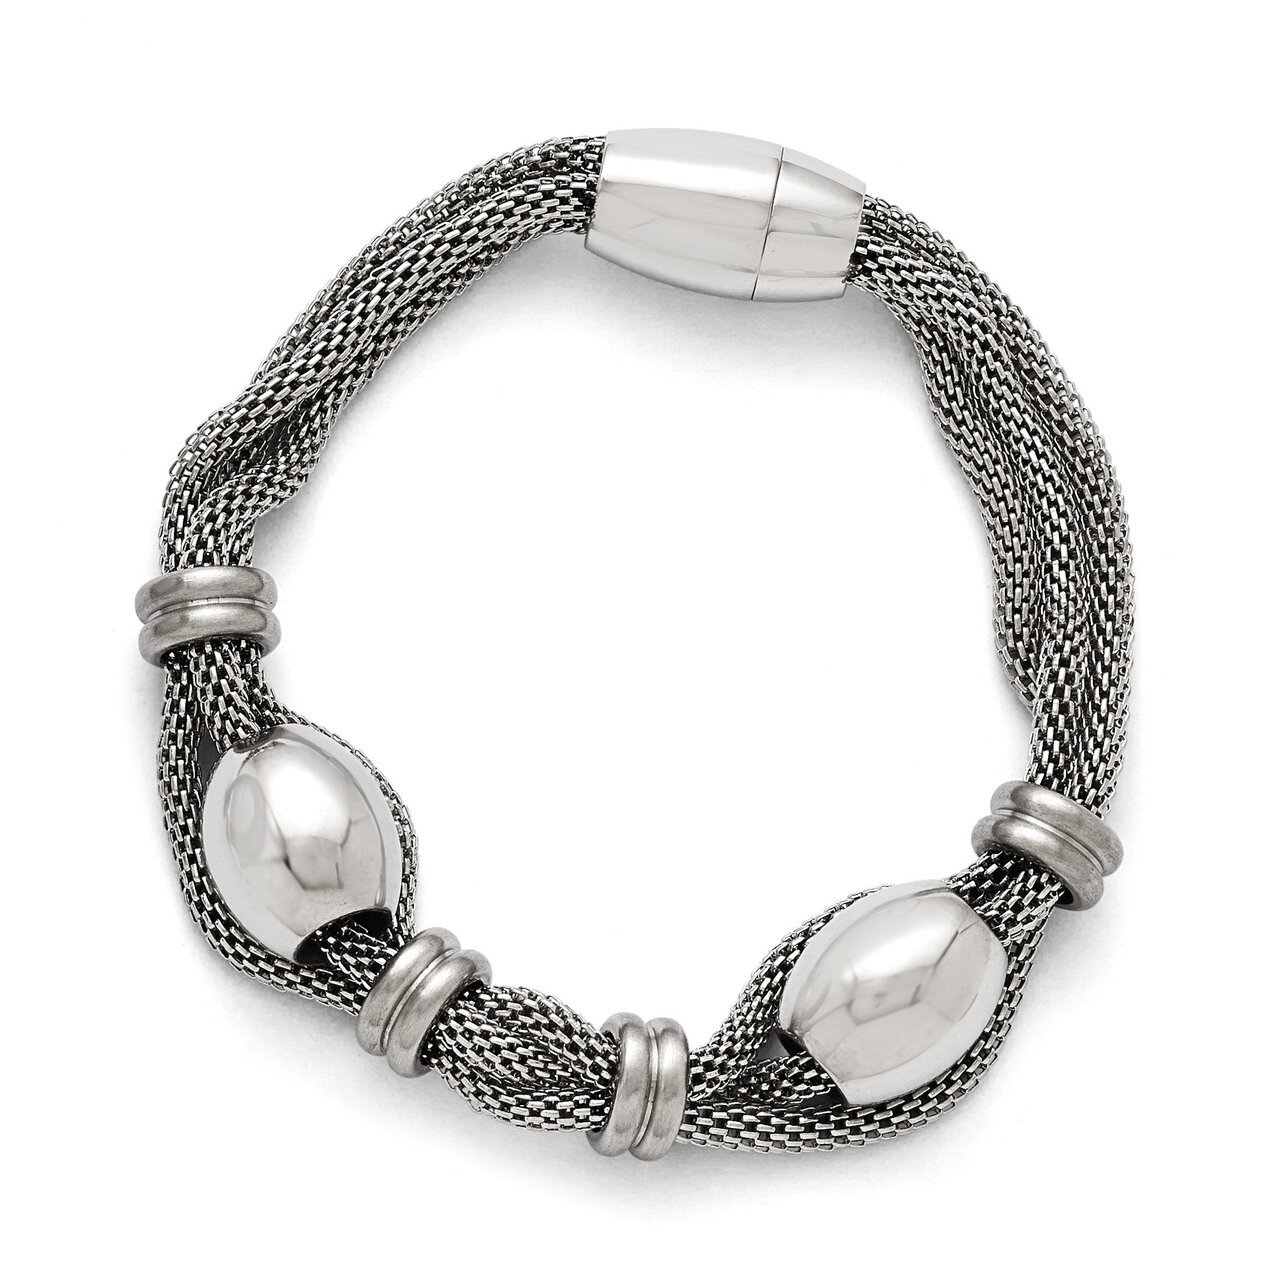 Polished and Brushed Beads Twisted Bracelet - Stainless Steel SRB1377